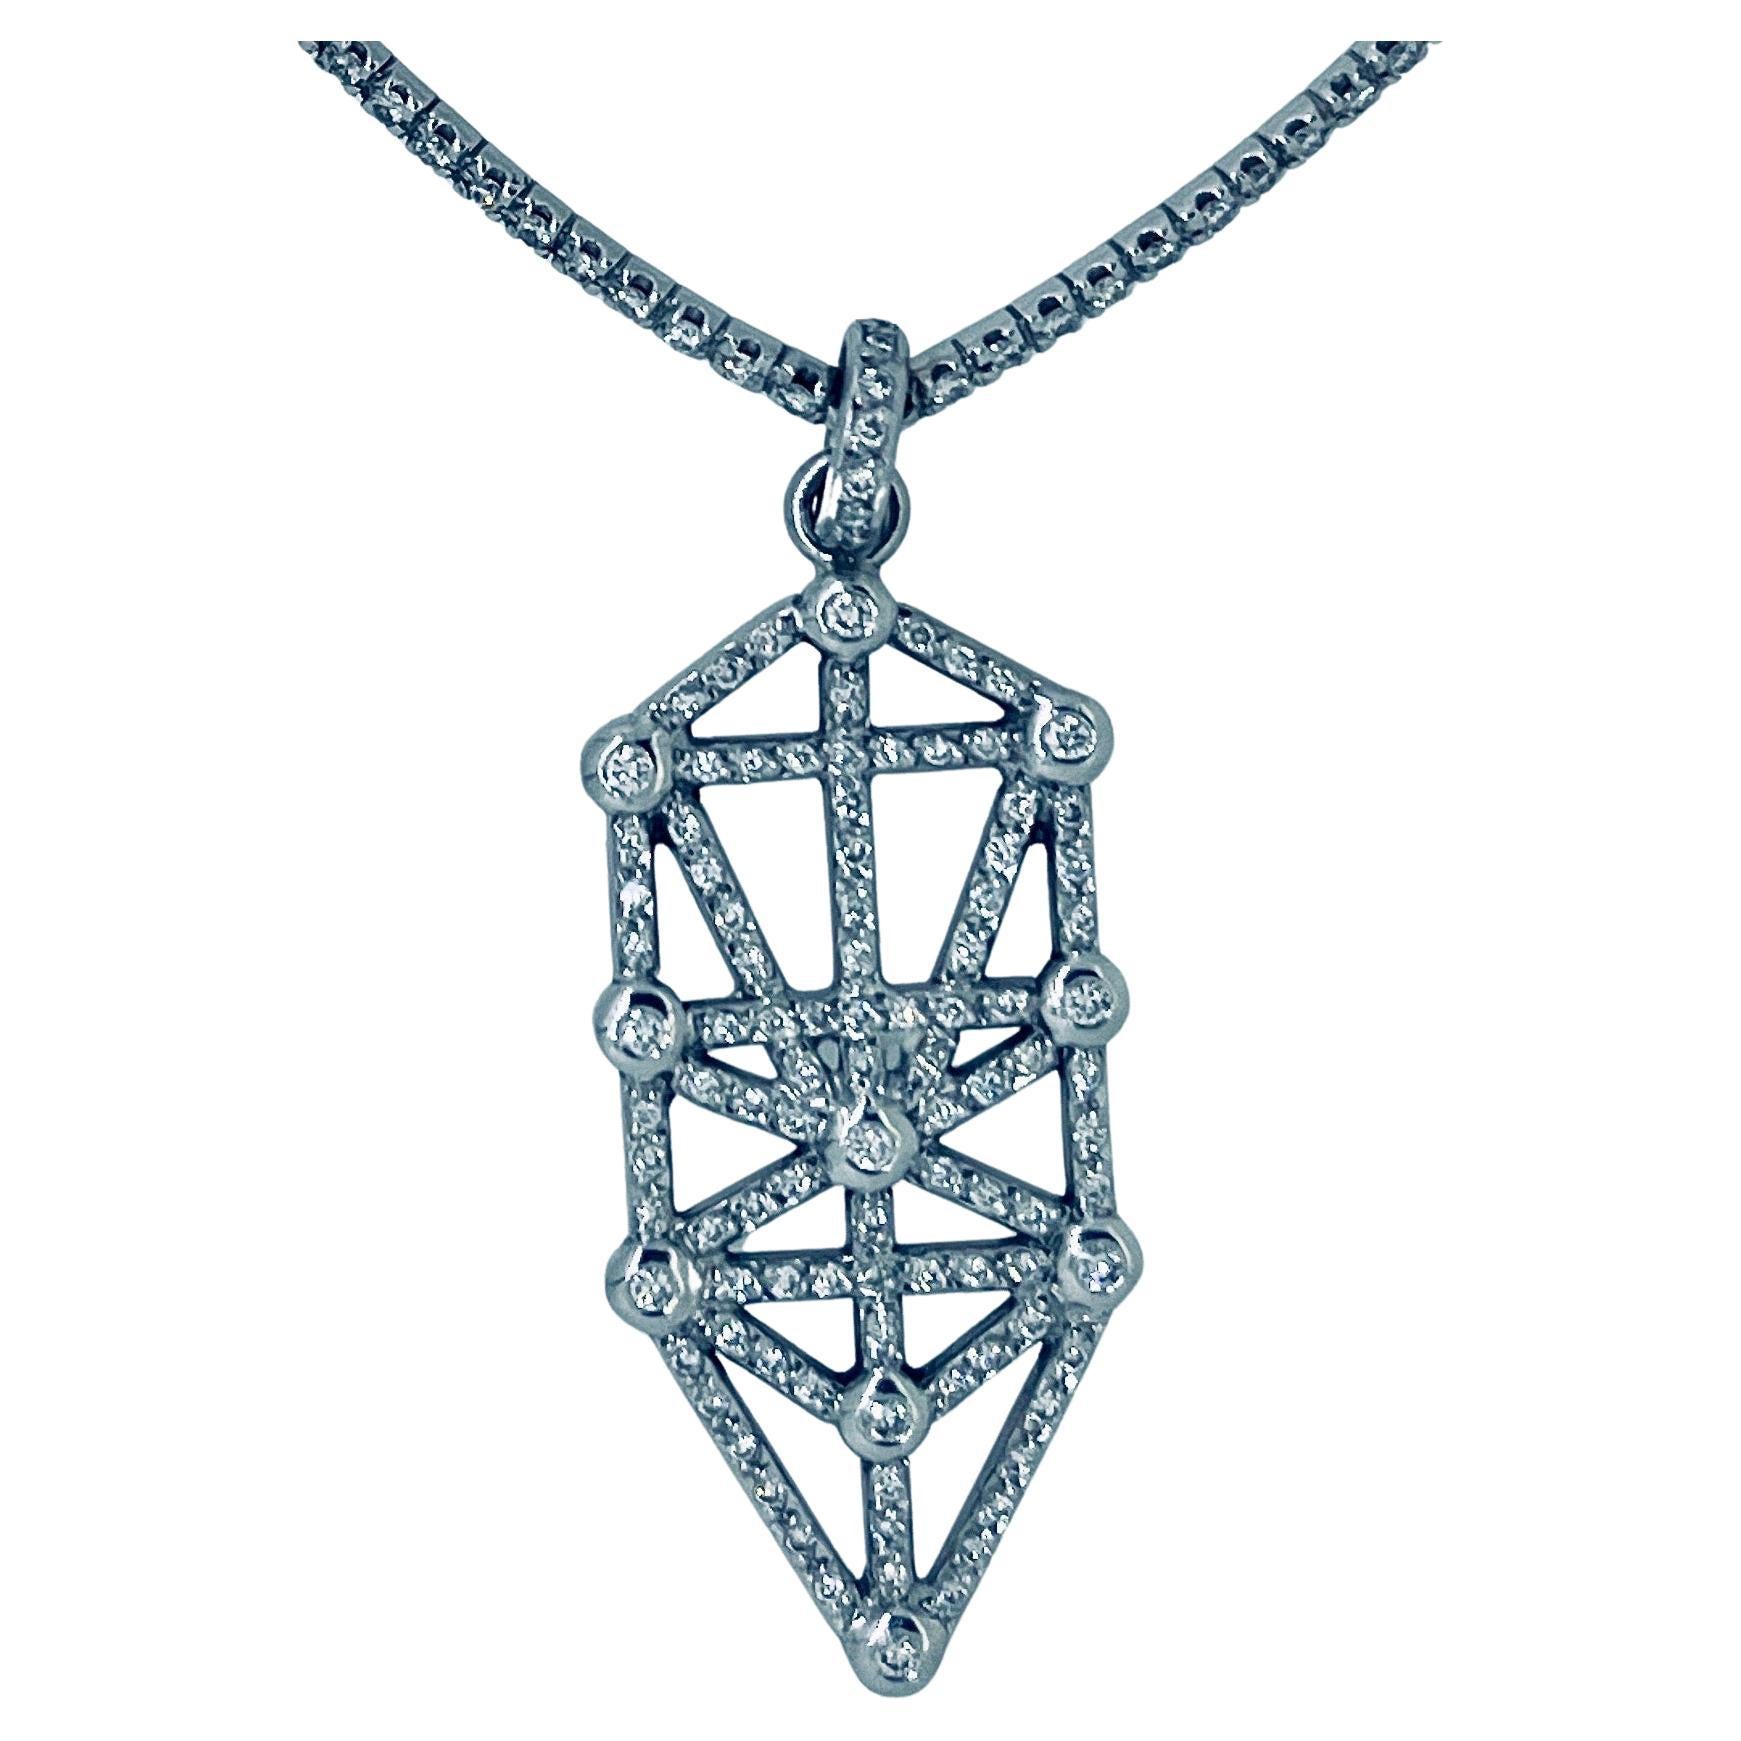 18ct White Gold, 2.2ct Diamond Segmented Pave Set Astrological Pendant Necklace